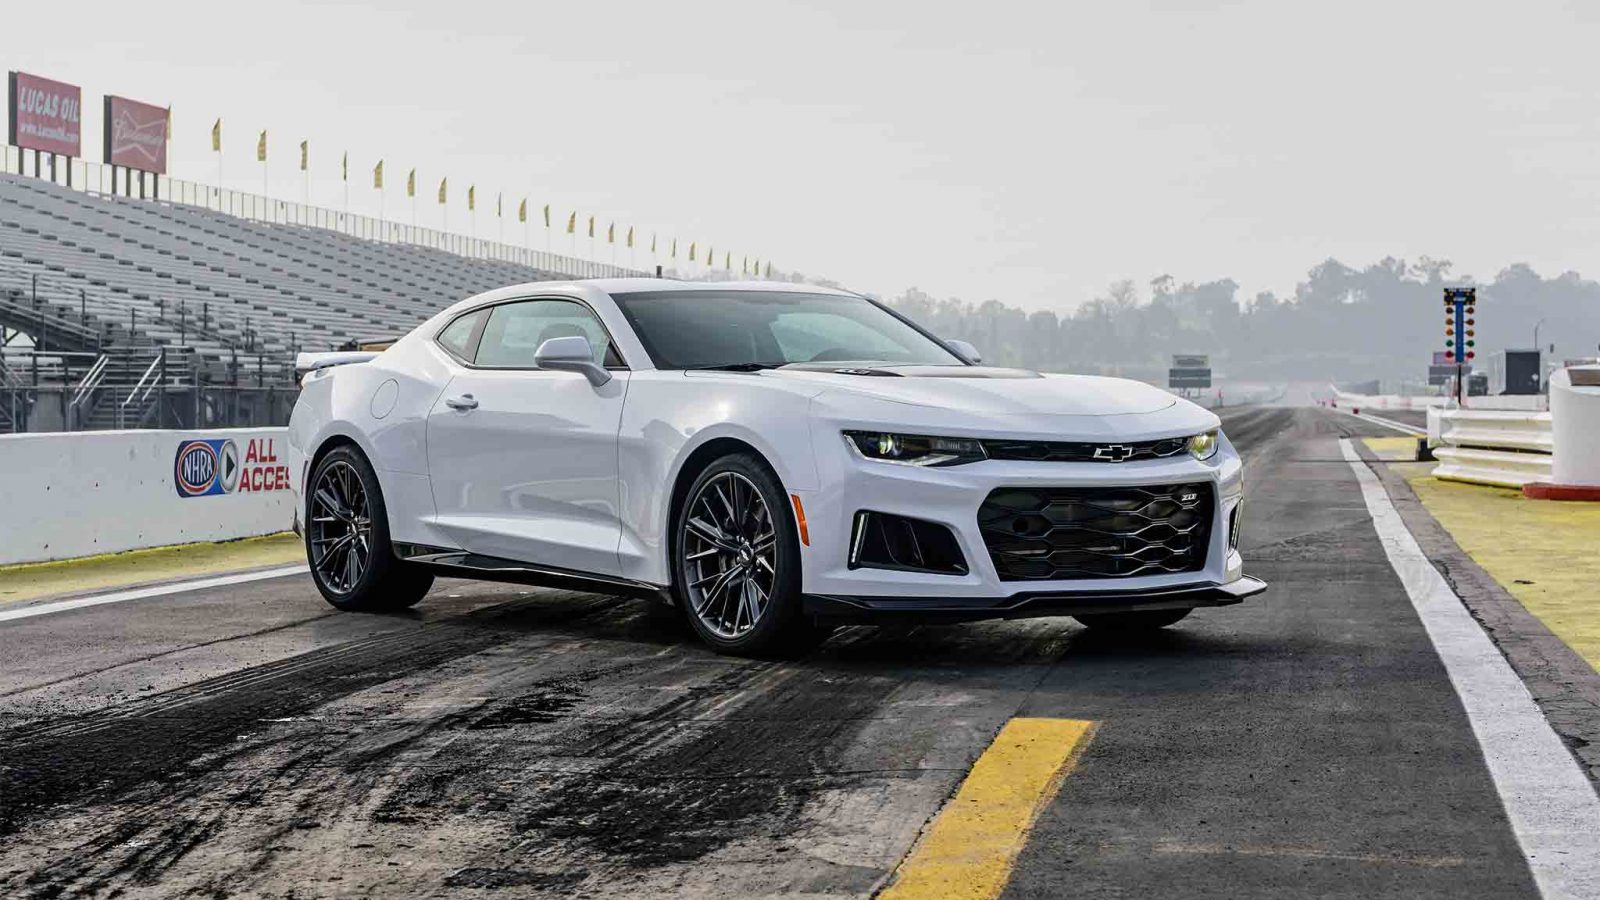 Chevrolet Camaro ZL1 in Triple White. Wallpaper. Book Source for free download HD, 4K & high quality wallpaper